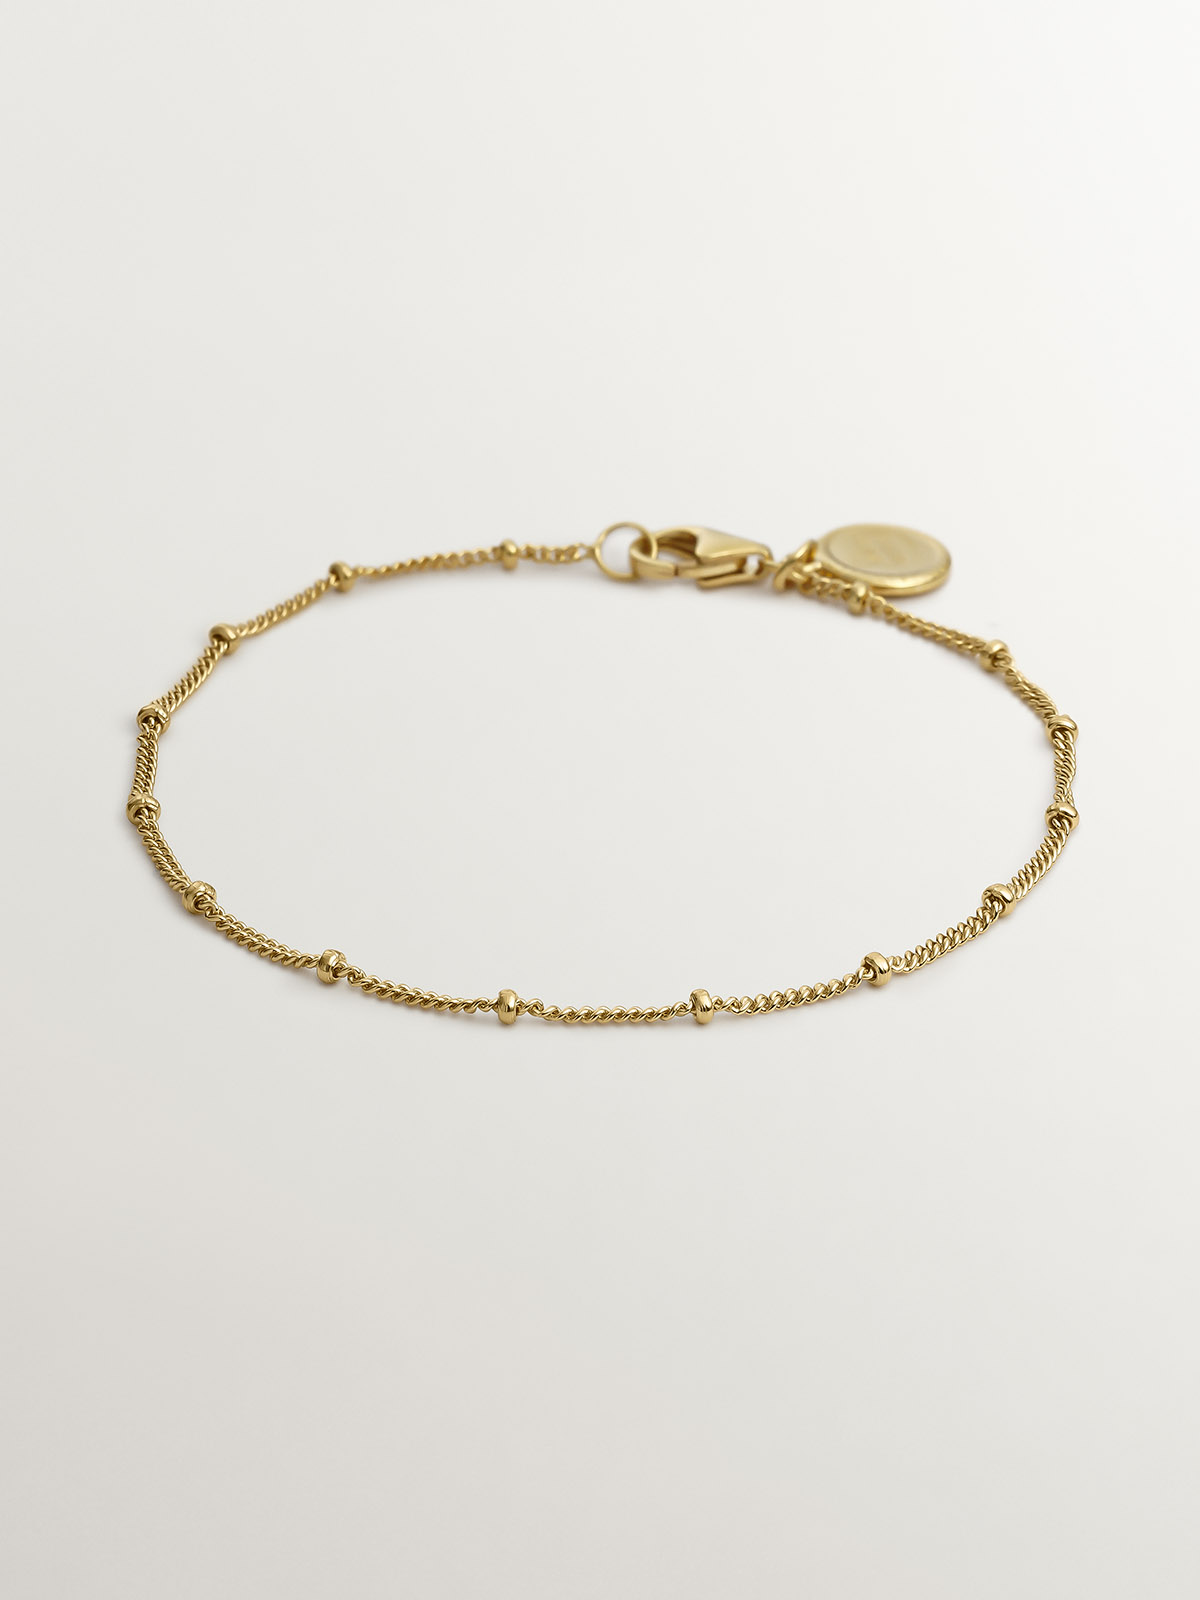 Chain bracelet with 925 silver beads bathed in 18K yellow gold.